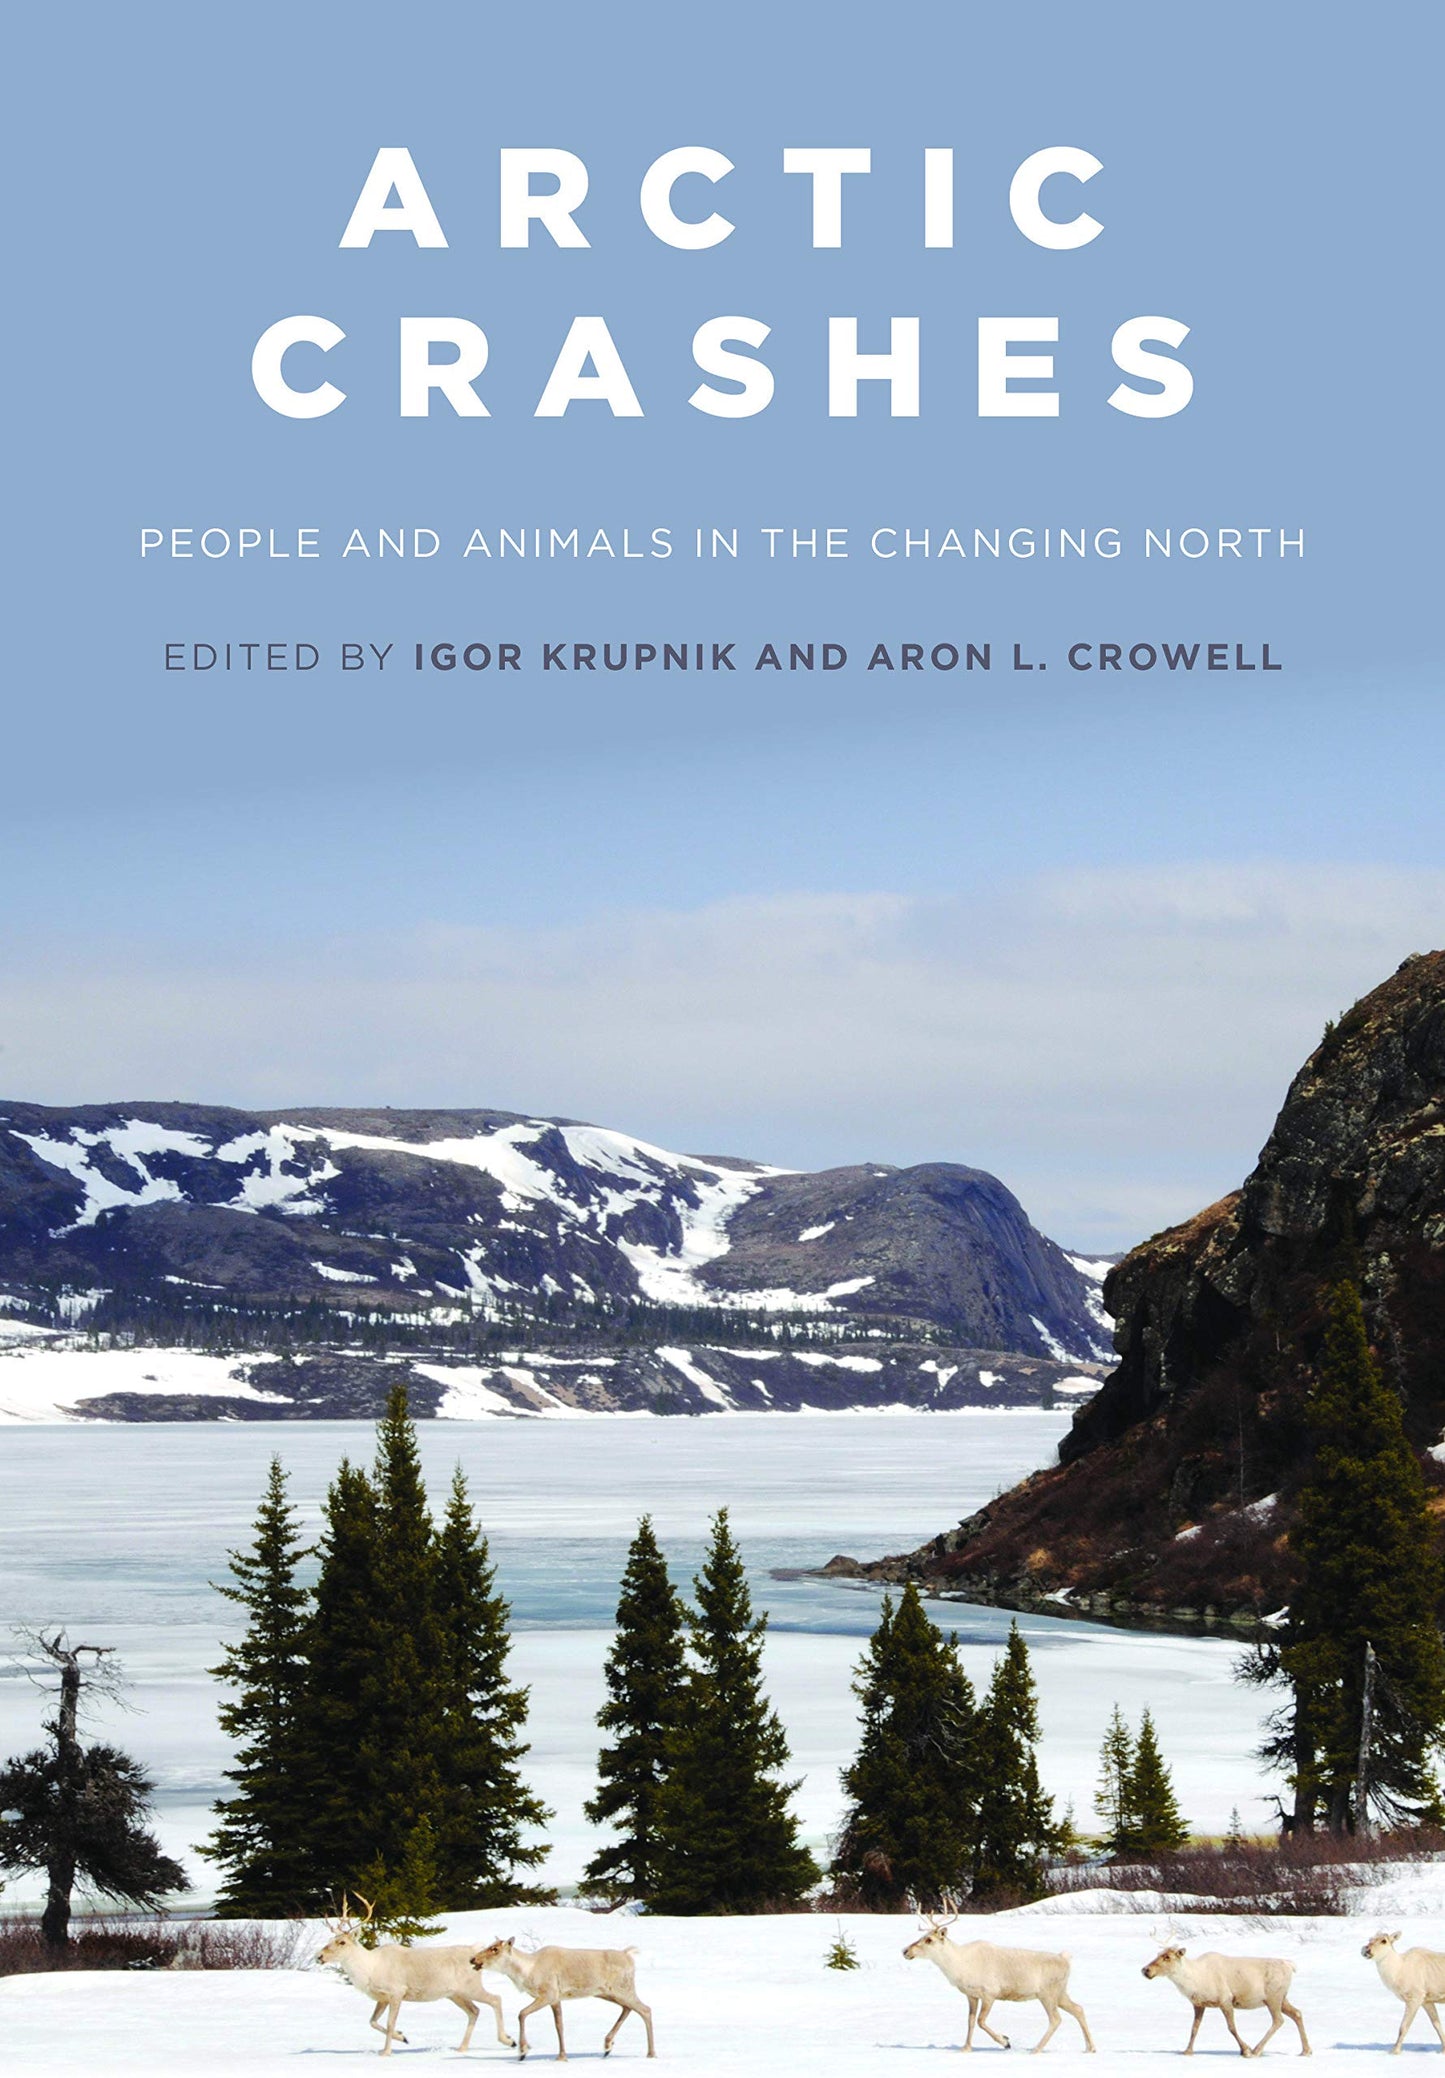 Arctic Crashes: People and Animals in the Changing North by Igor Krupnik and Aron L. Crowell